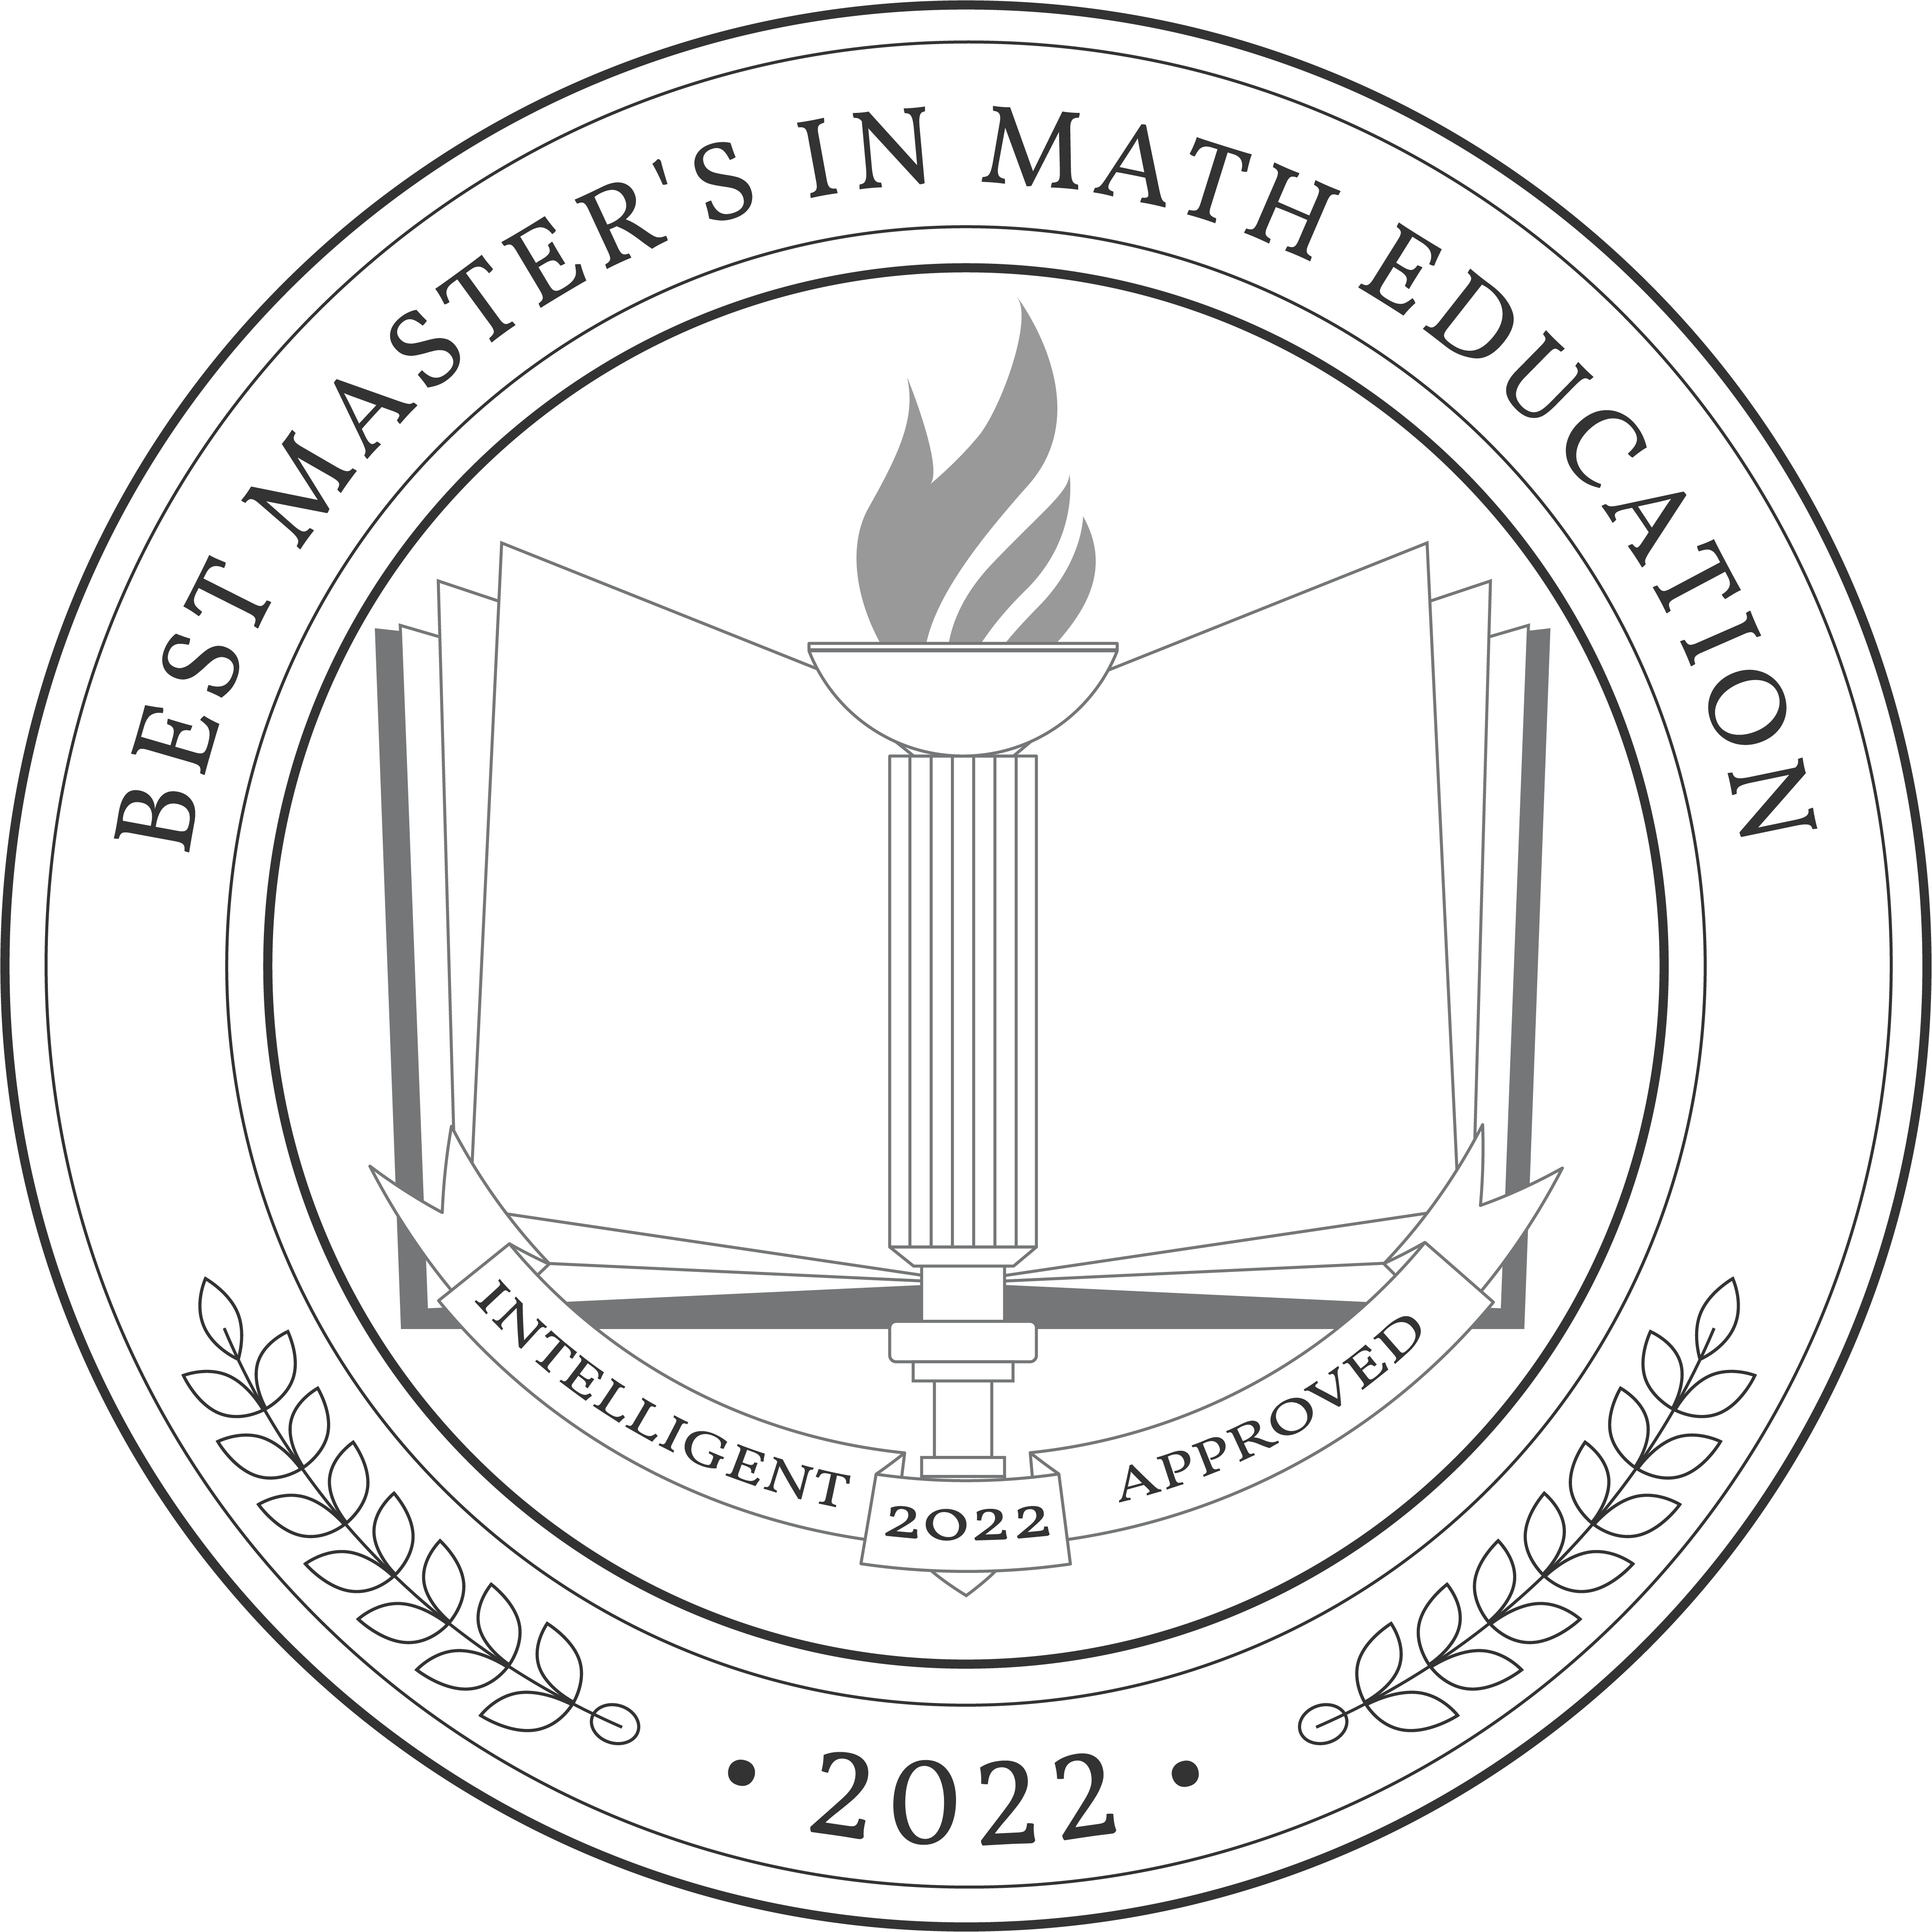 best-master_s-in-math-education-badge.png